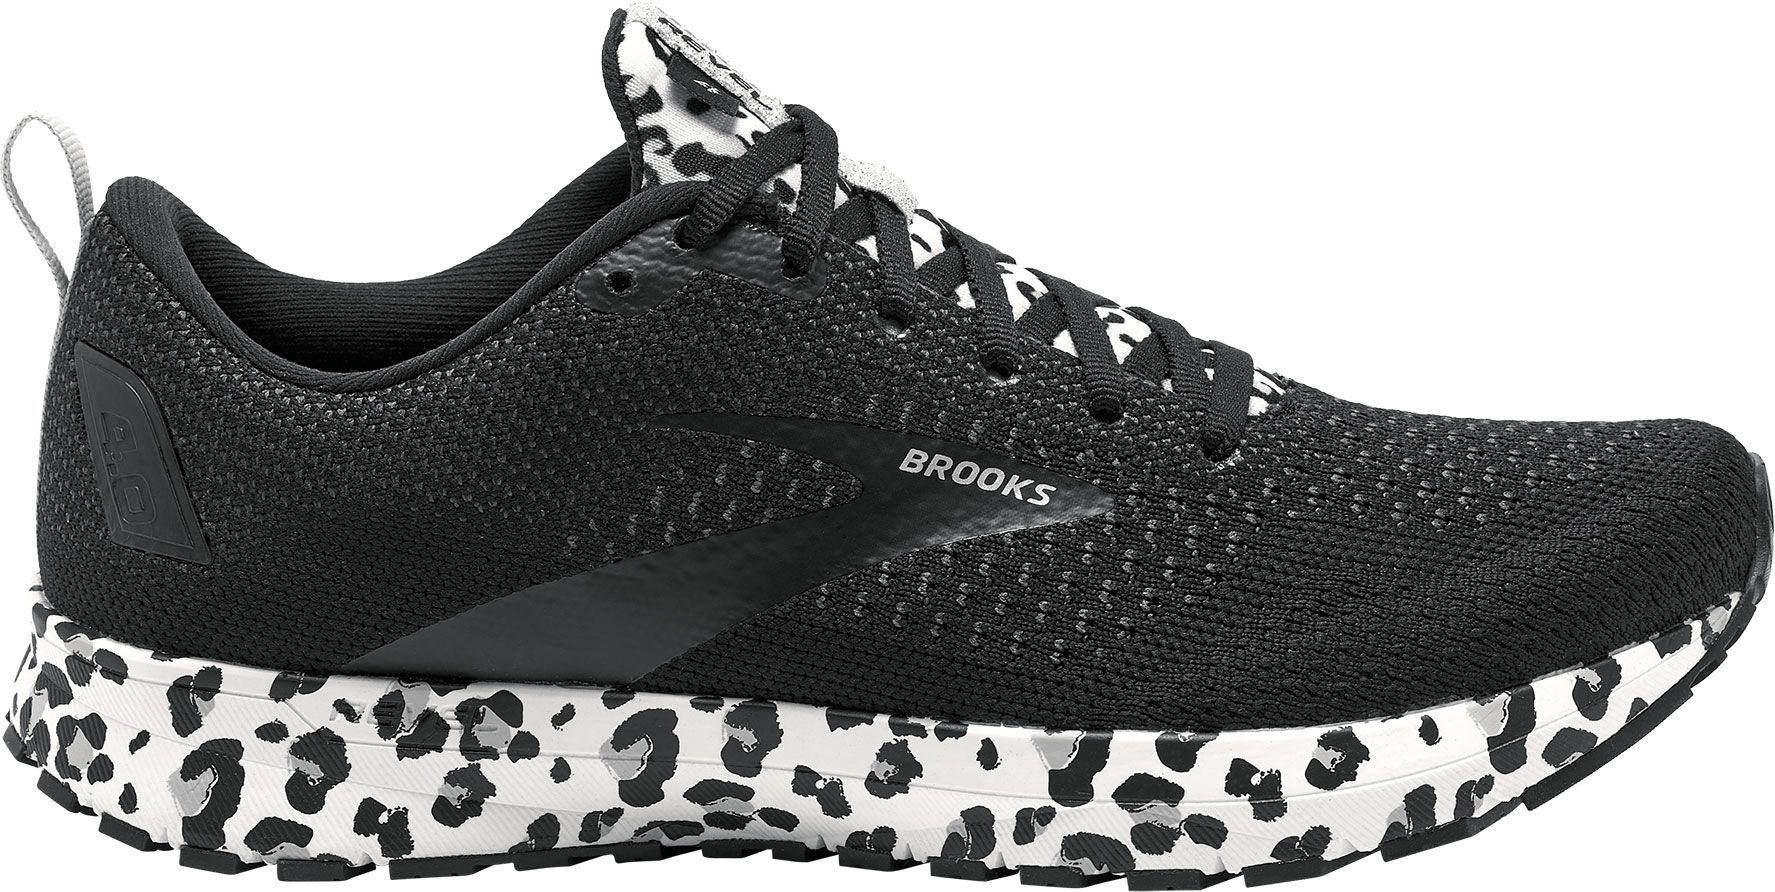 black and white brooks women's shoes